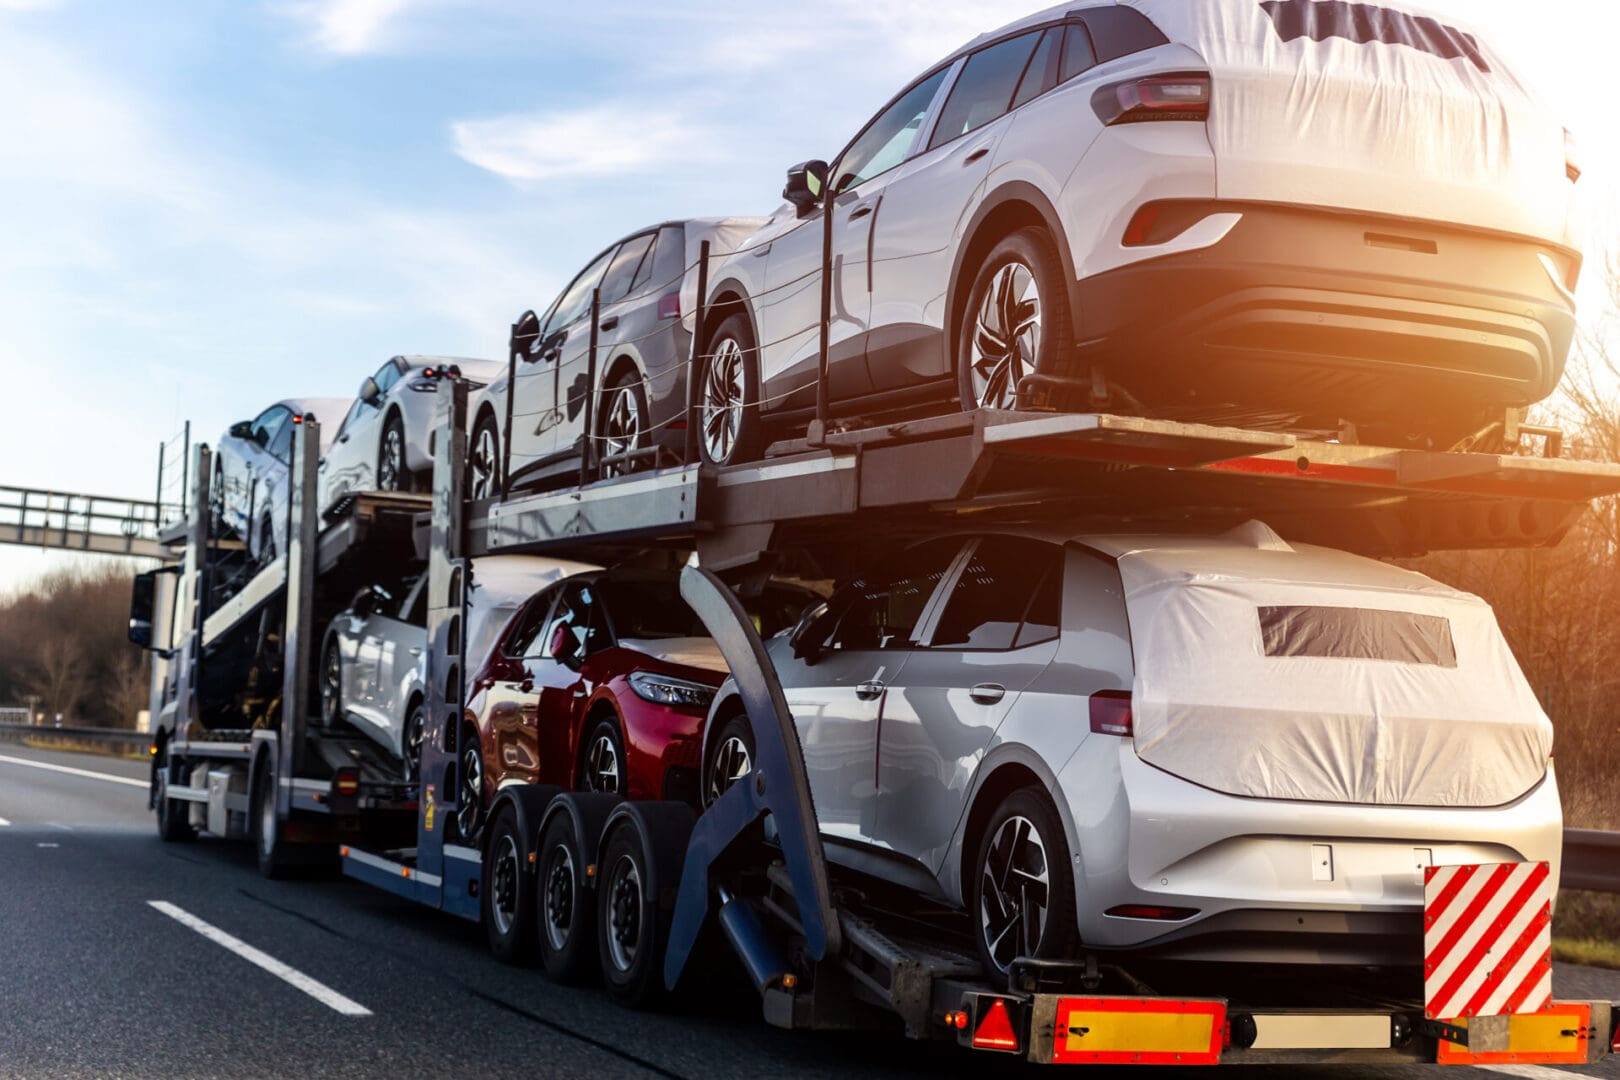 A truck carrying cars on the road